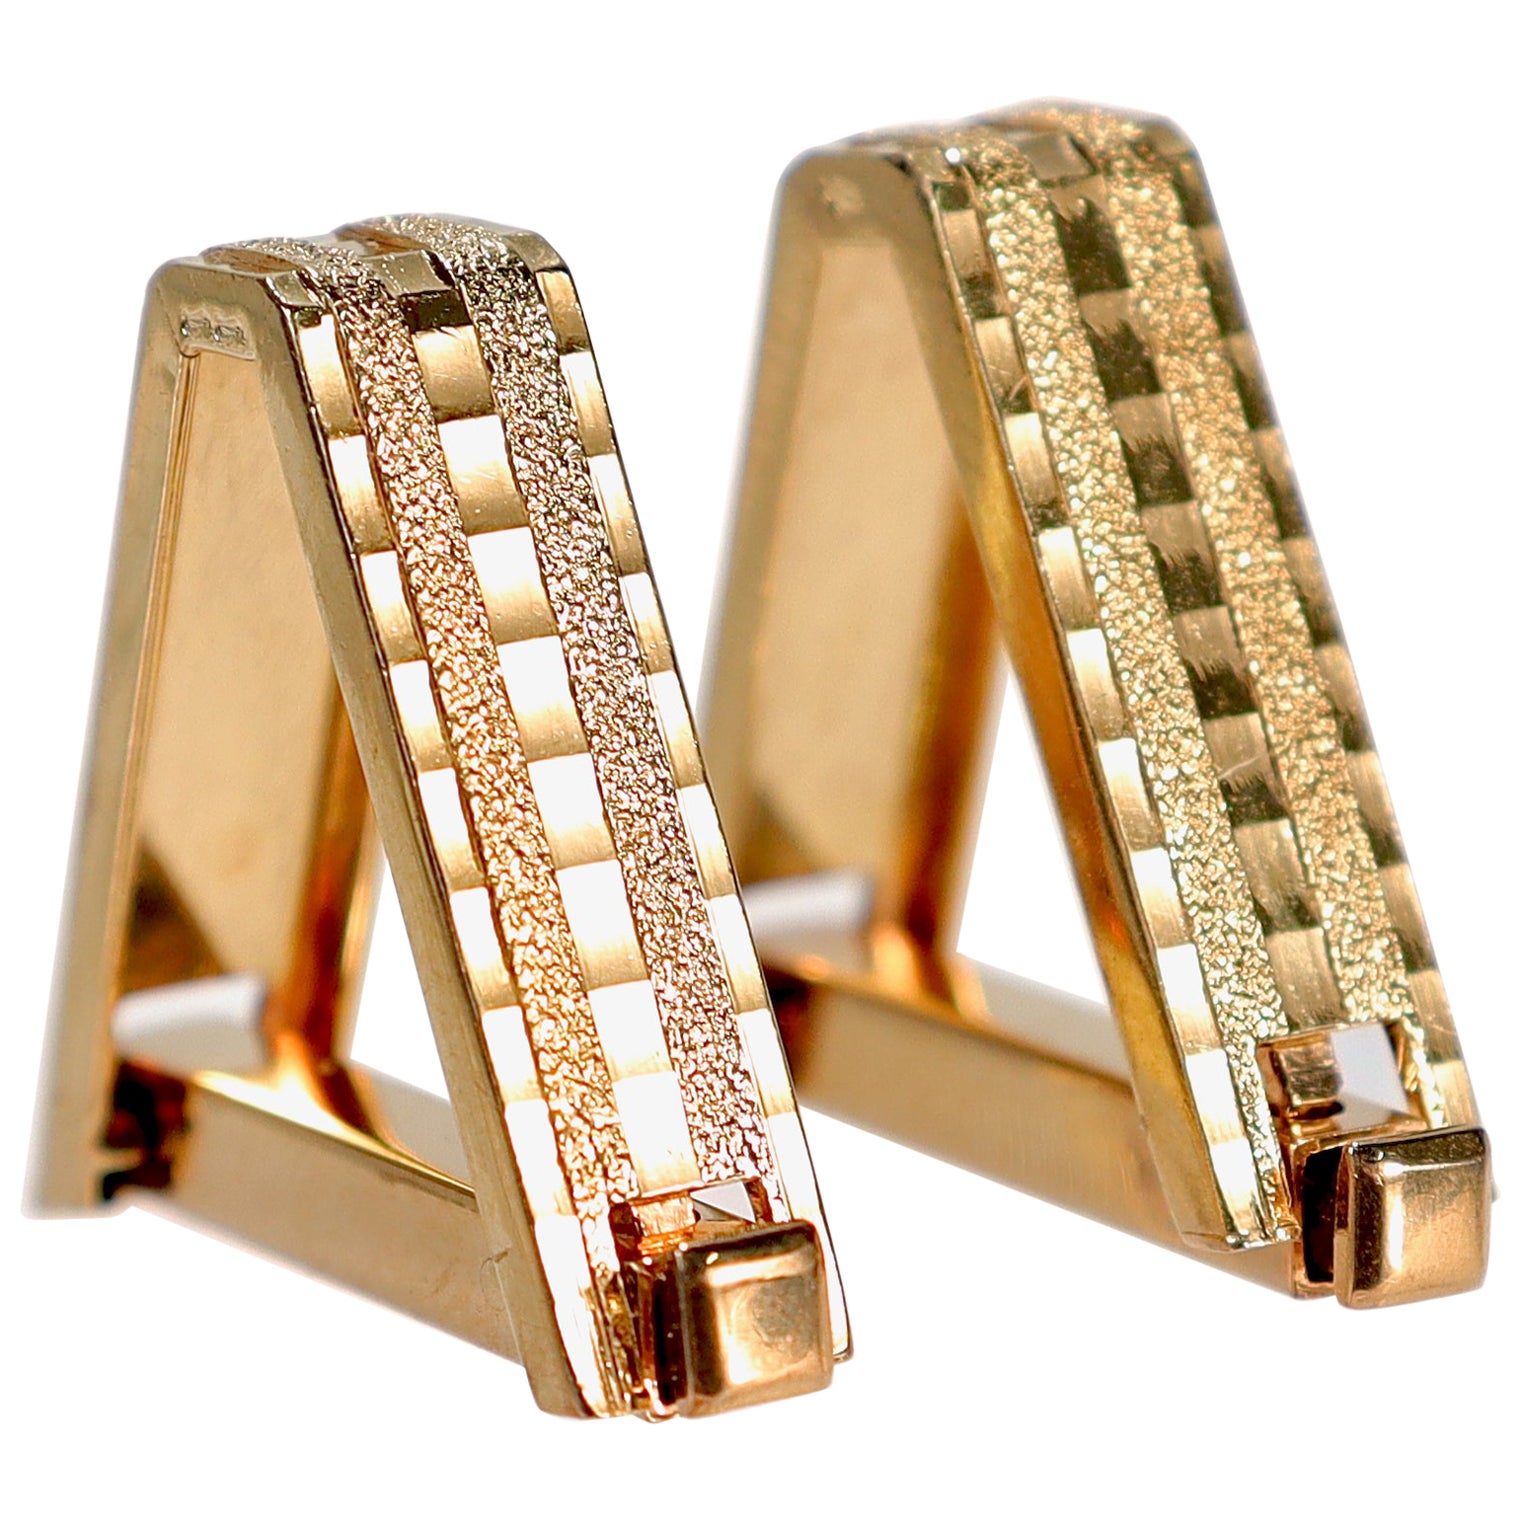 Signed 18 Karat French Gold Triangular or Wrapped Cufflinks For Sale